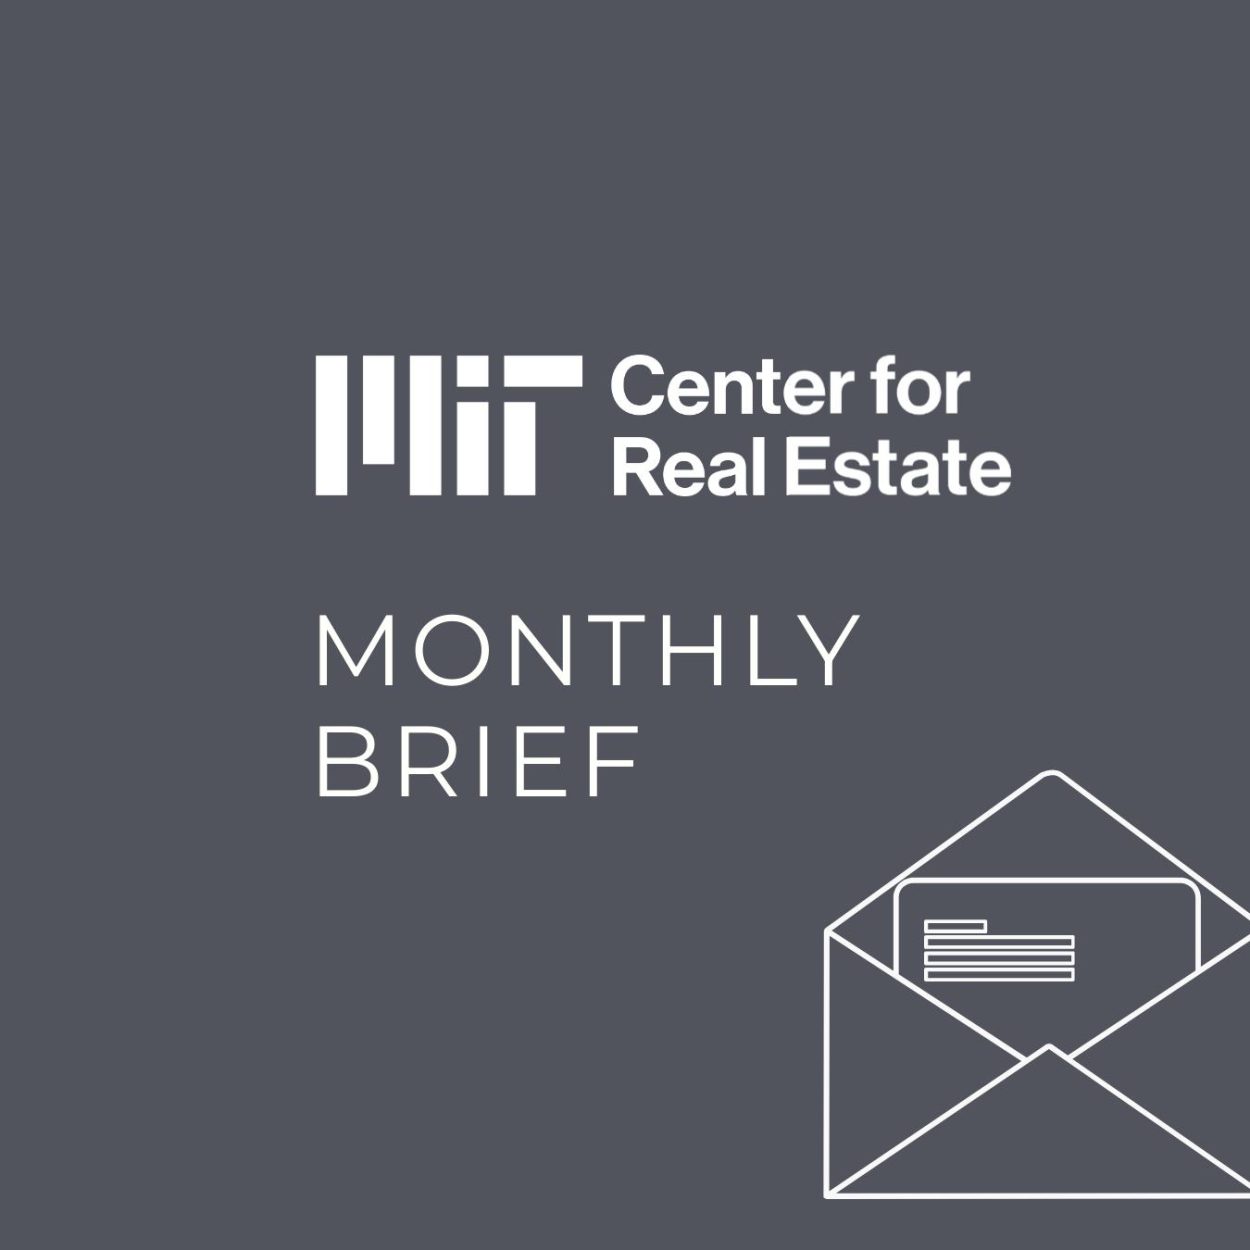 MIT CENTER FOR REAL estate monthly brief